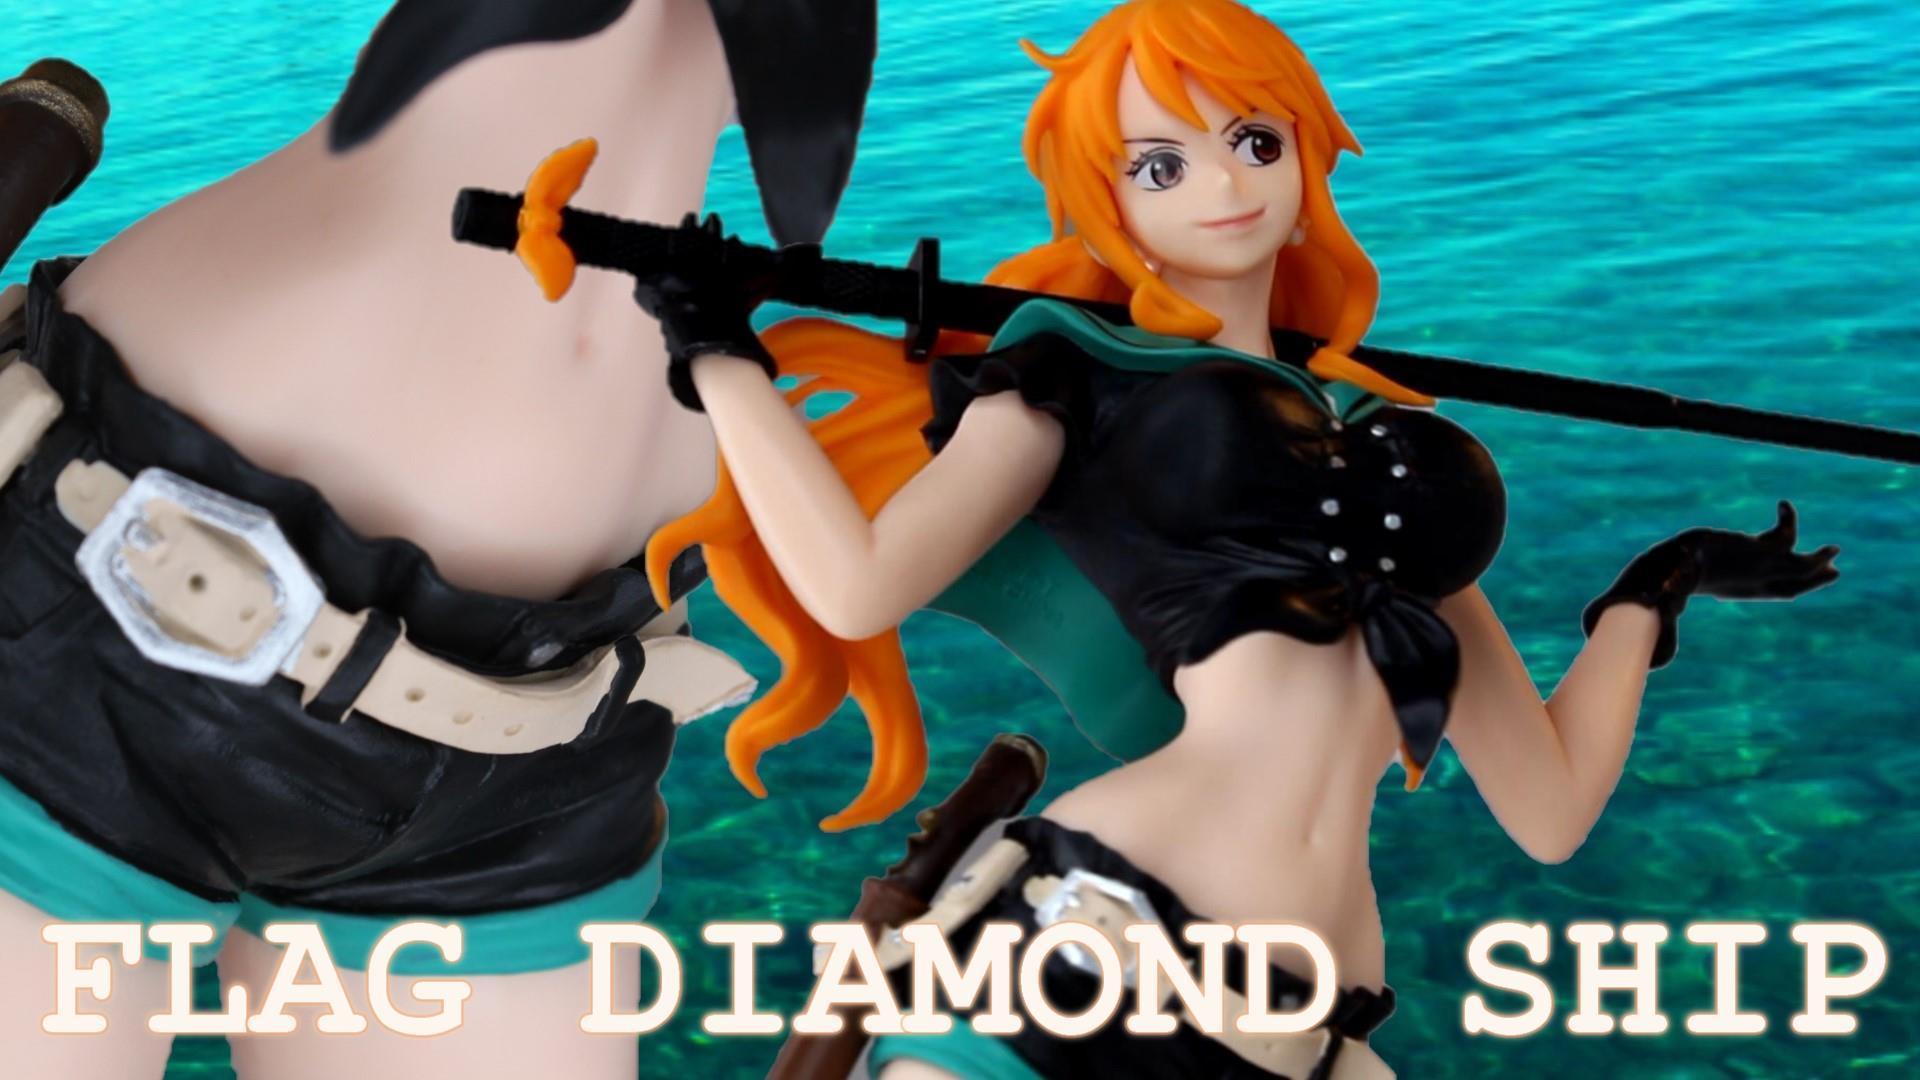 ONE PIECE] FLAG DIAMOND SHIP NAMI CODE:B Figure review (Unboxing